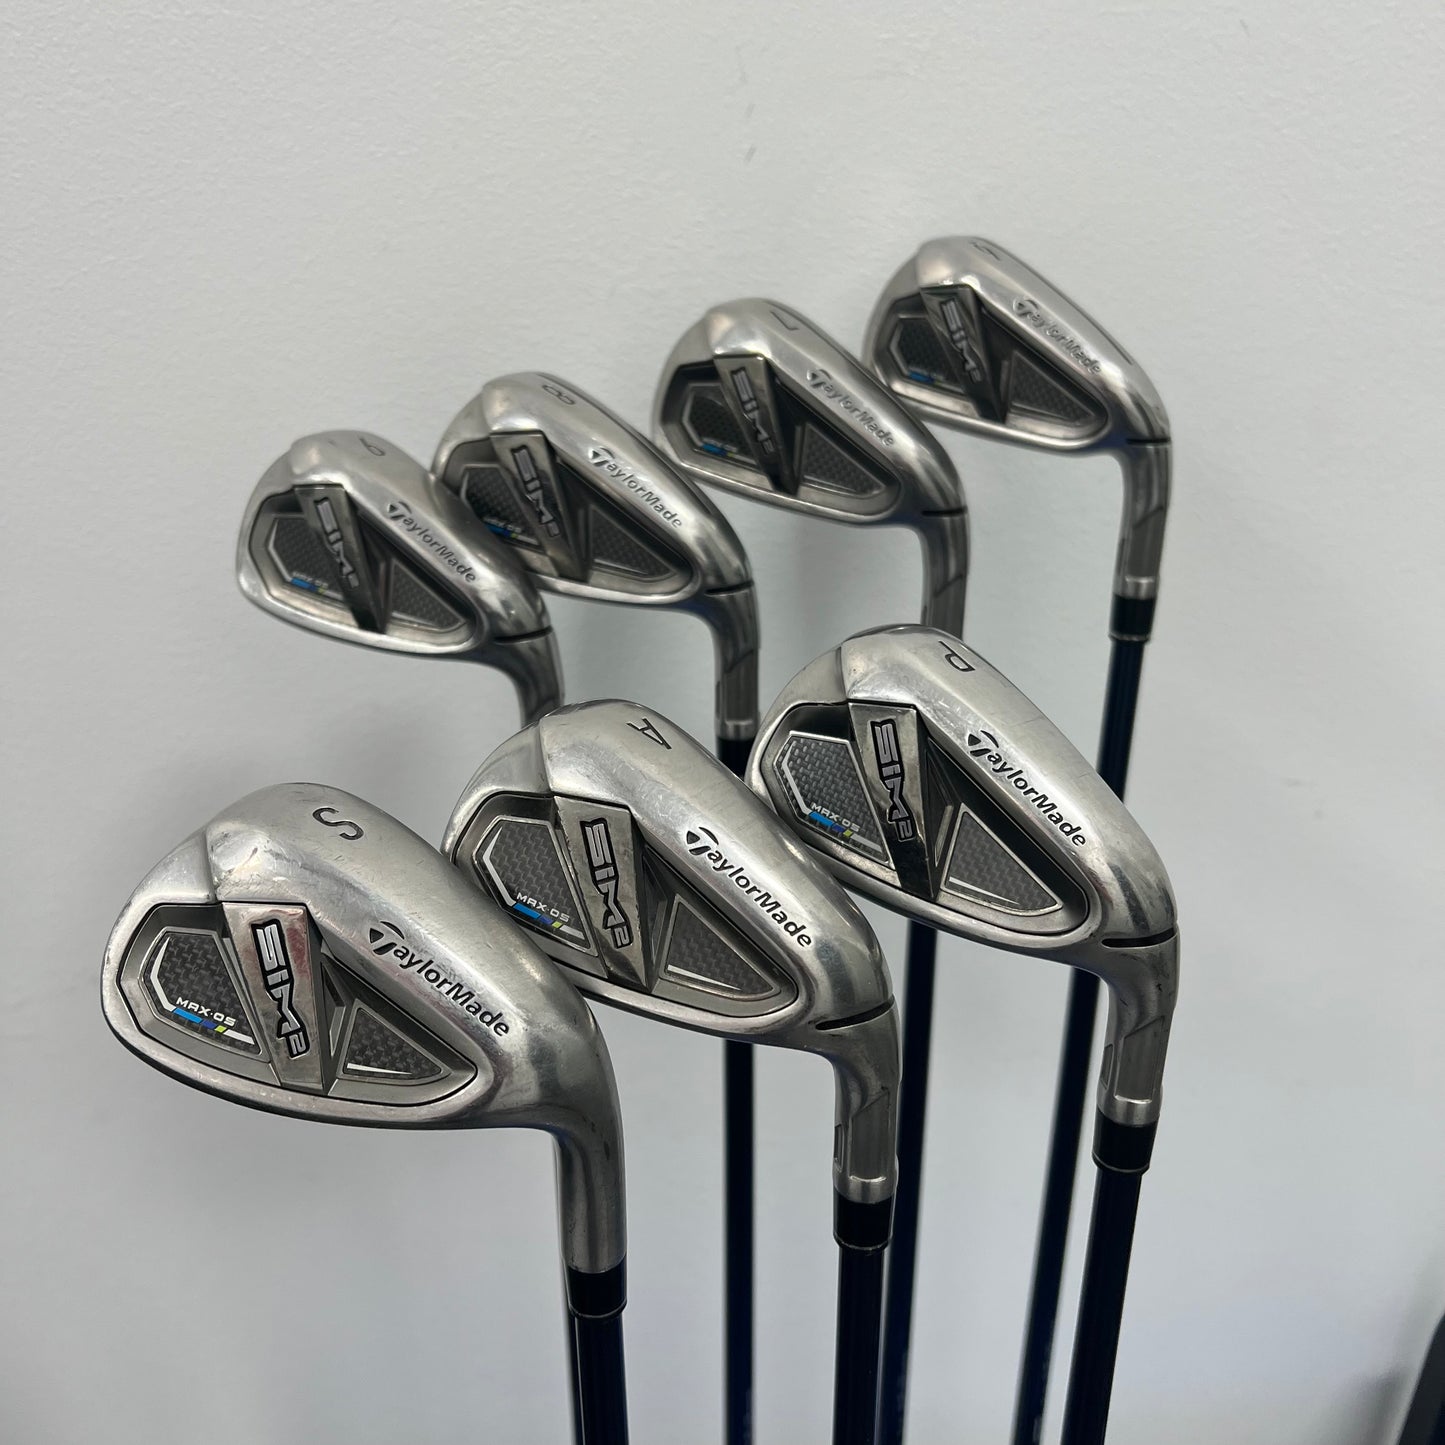 Taylormade SIM2 MAX OS Iron Set 6-PW,AW,SW Graphite Shaft Senior Flex Right Hand (Pre-Owned)